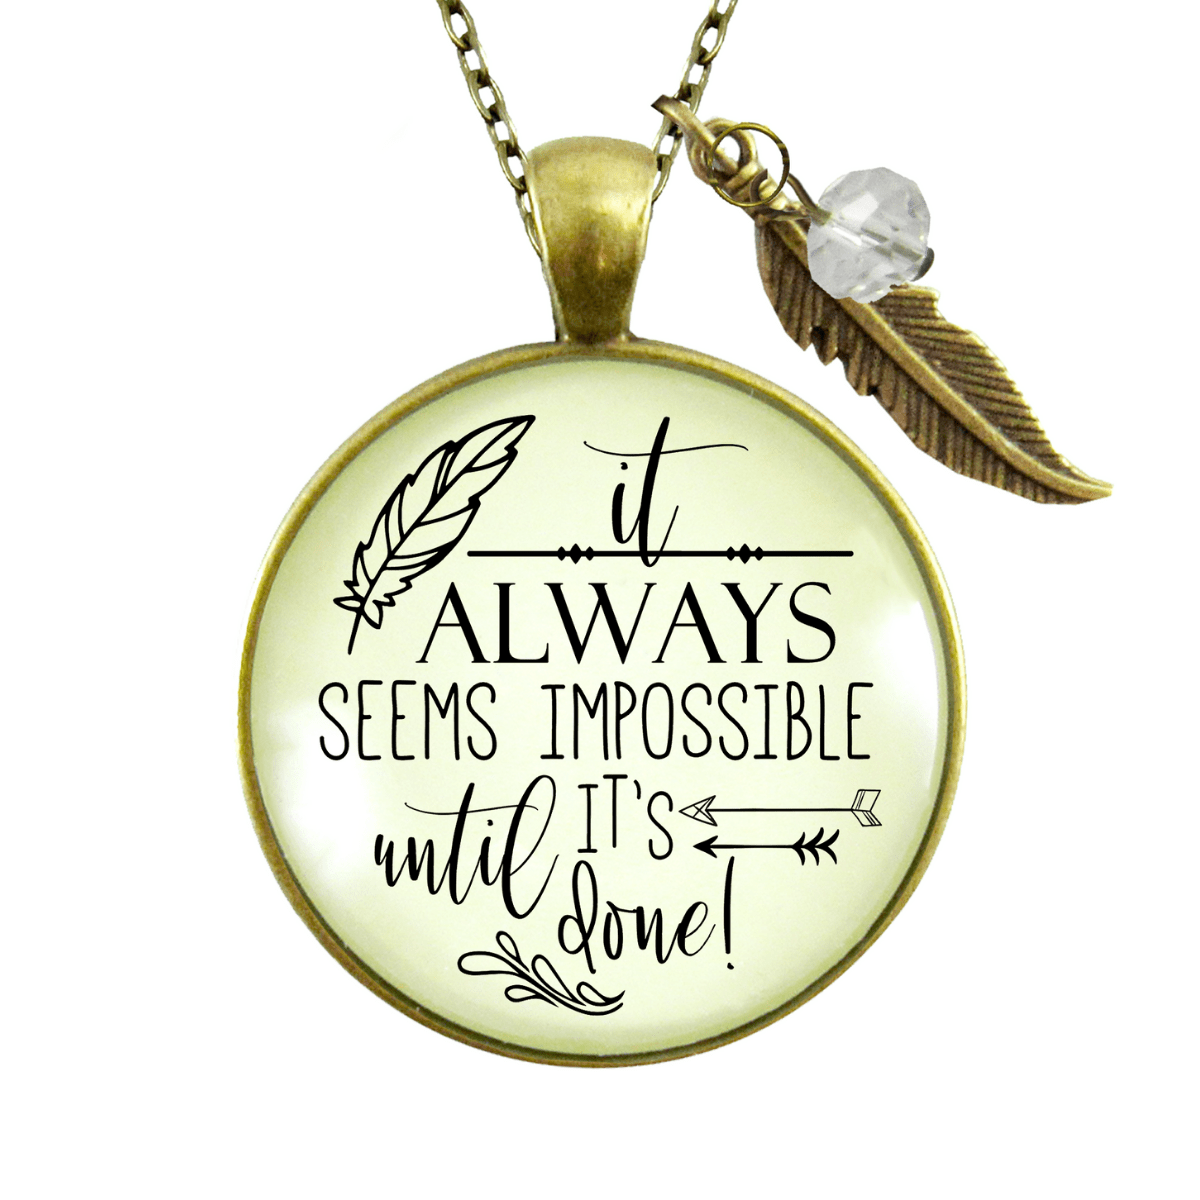 Gutsy Goodness Mantra Necklace It Always Seems Impossible Until It's Done - Gutsy Goodness Handmade Jewelry;Mantra Necklace It Always Seems Impossible Until It's Done - Gutsy Goodness Handmade Jewelry Gifts